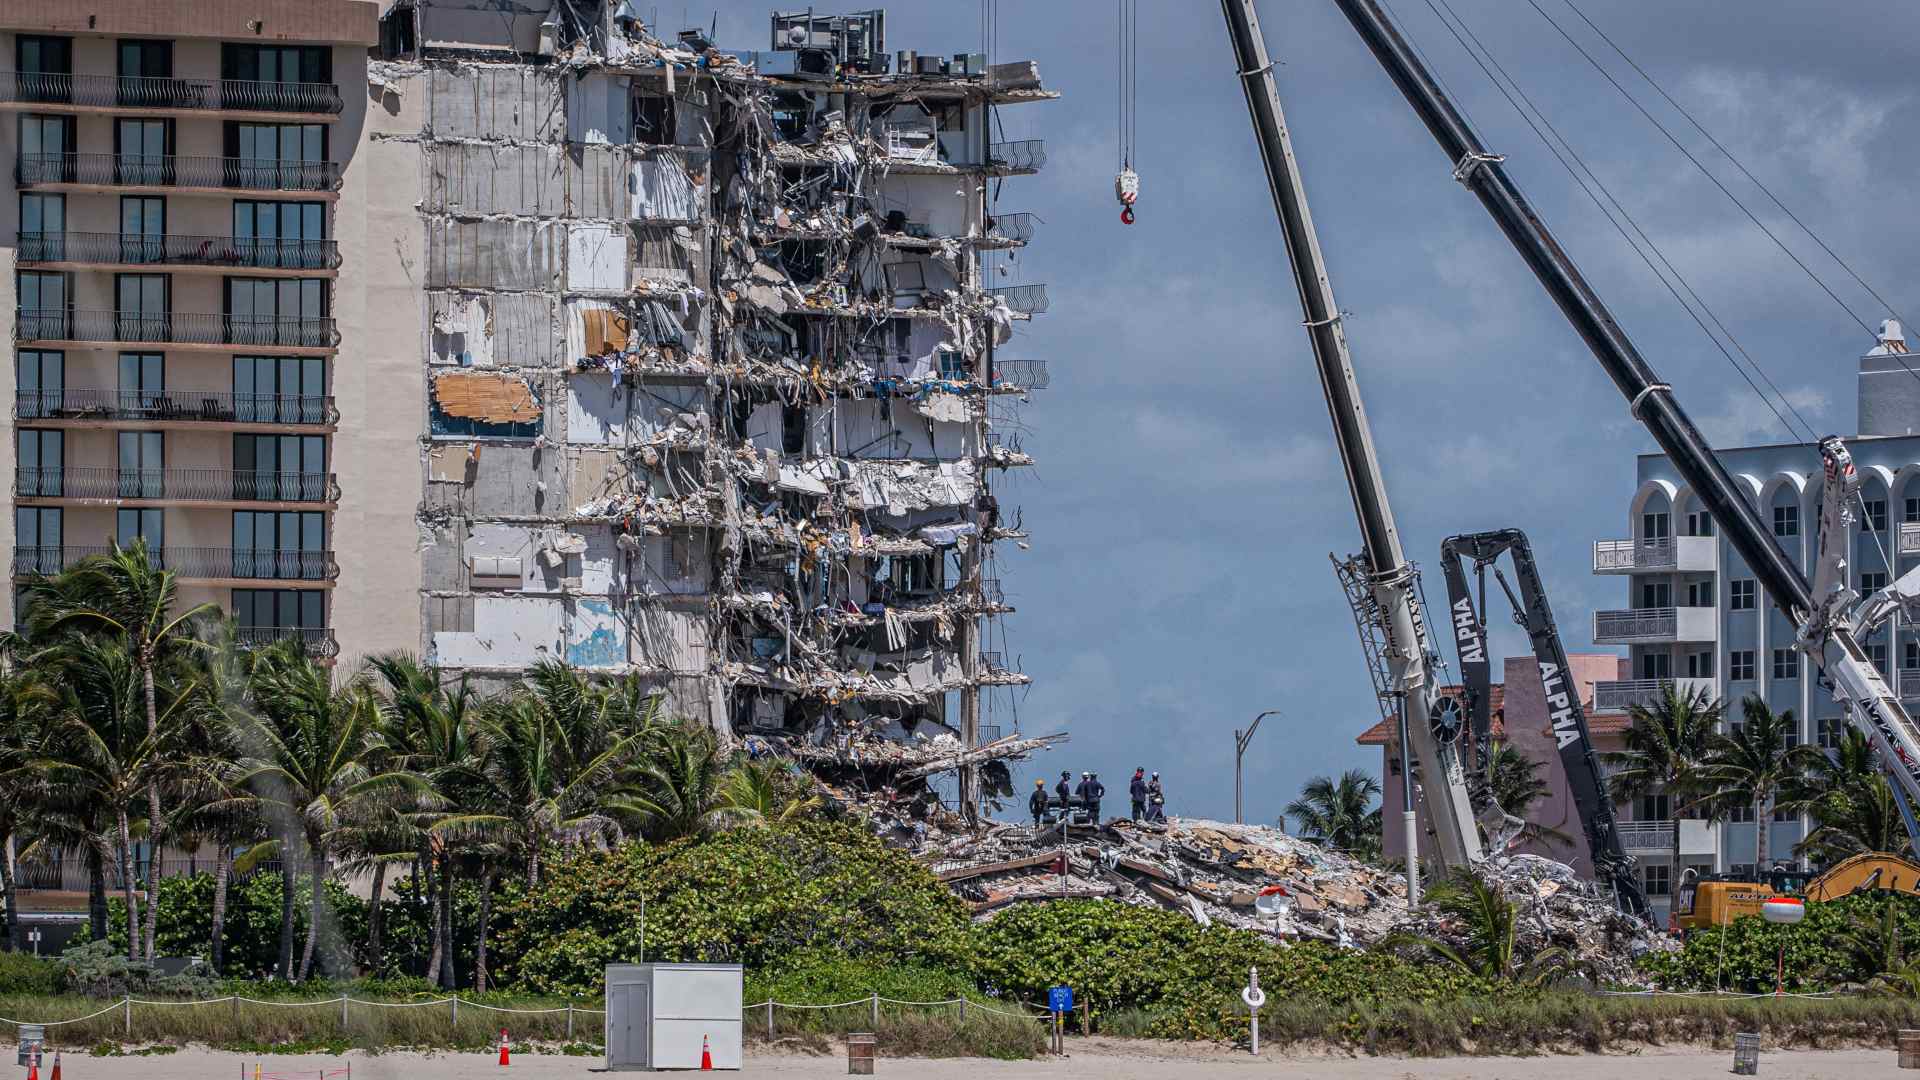 At the partially collapsed 12-story Champlain Towers South condo, members of a search and rescue team look for possible survivors on June 27, 2021.